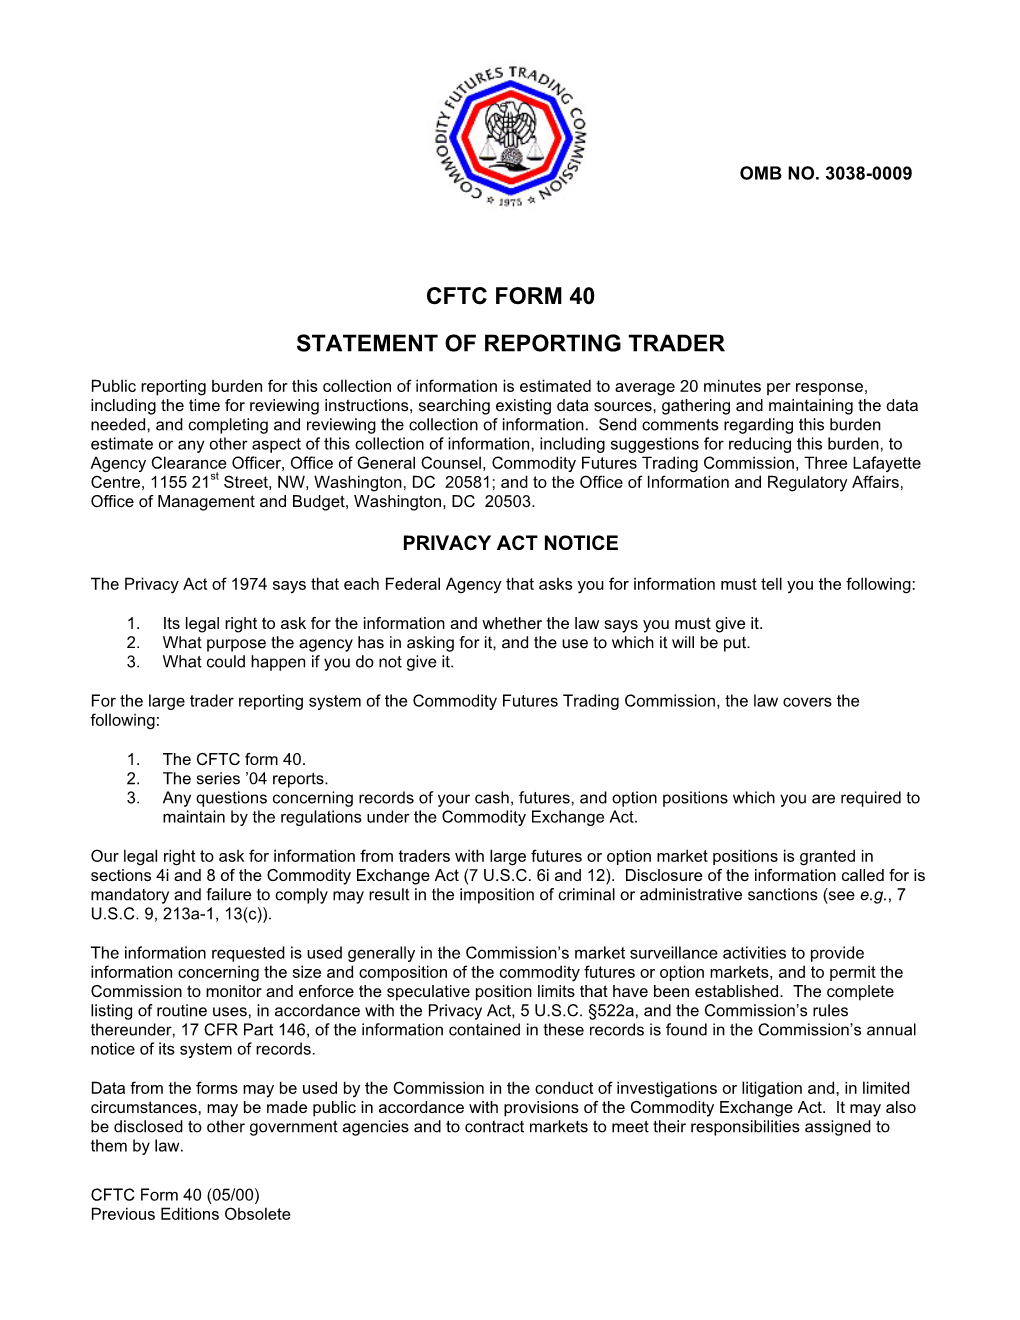 Statement of Reporting Trader, CFTC Form 40